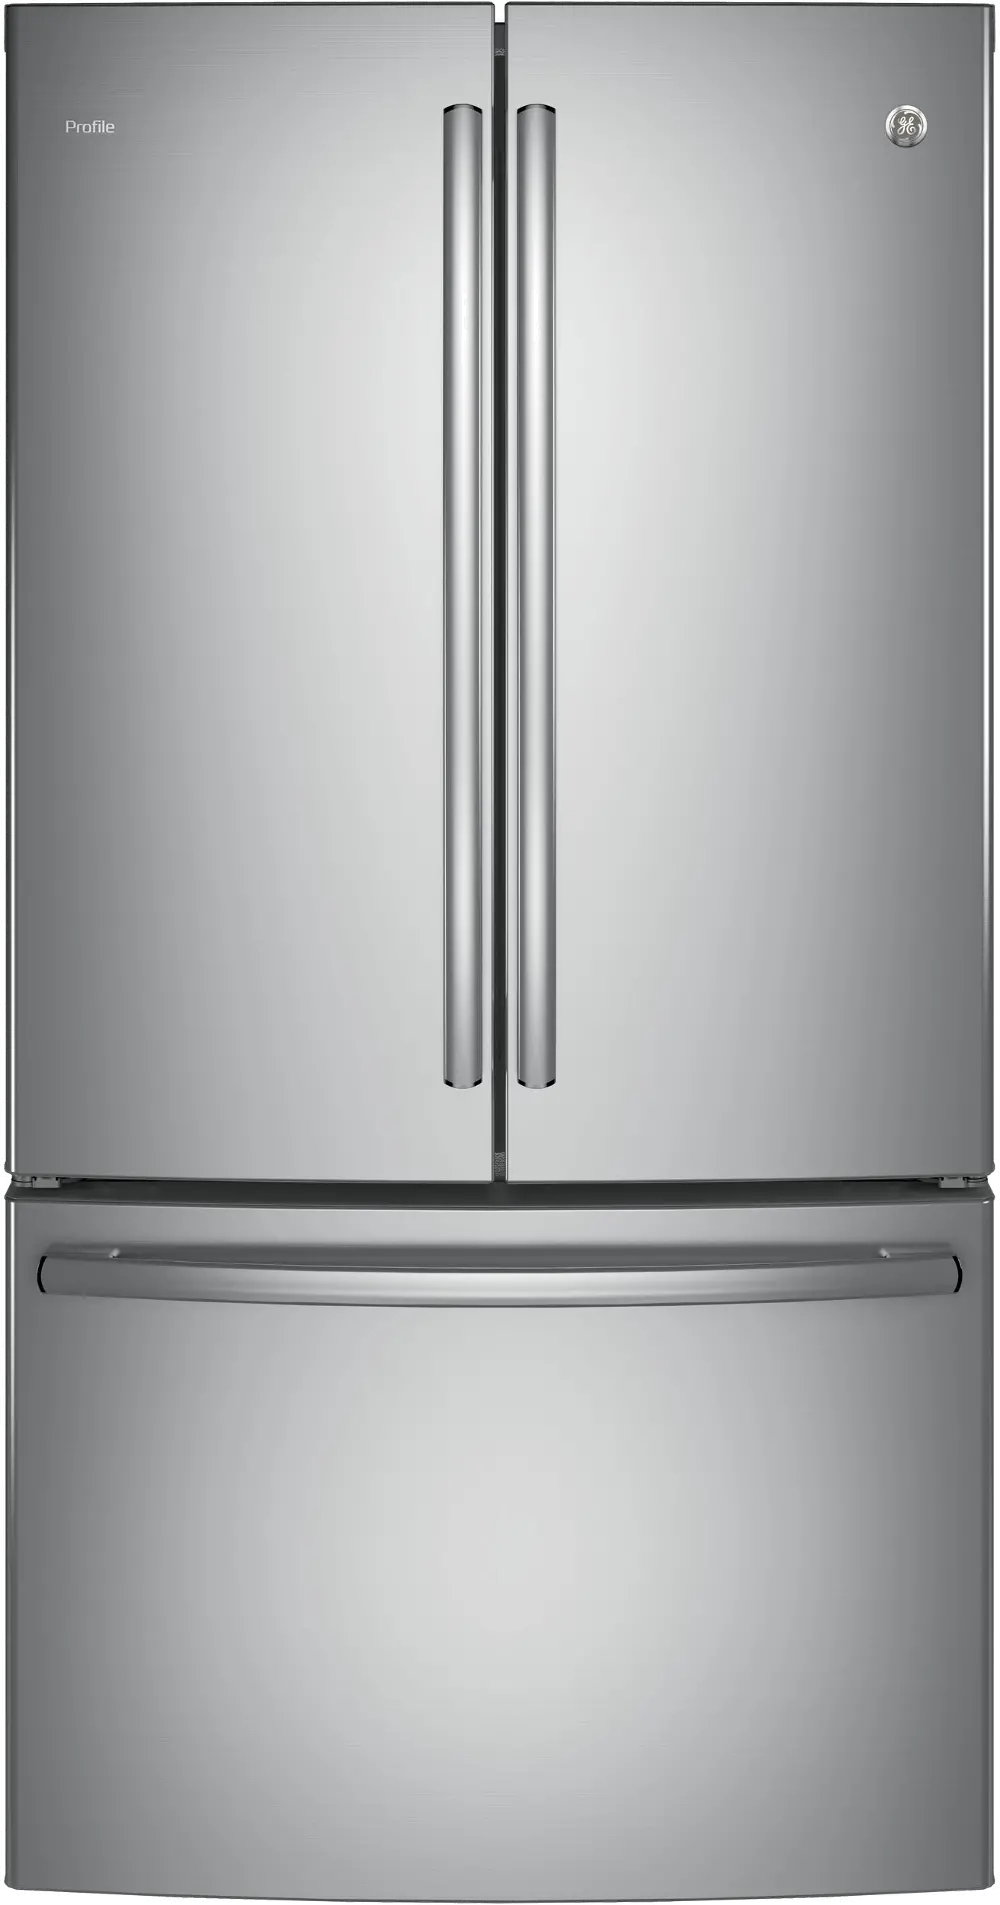 PWE23KSKSS GE Profile French Door Refrigerator 23.1 cu. ft. - 36 Inch Stainless Steel Counter Depth-1